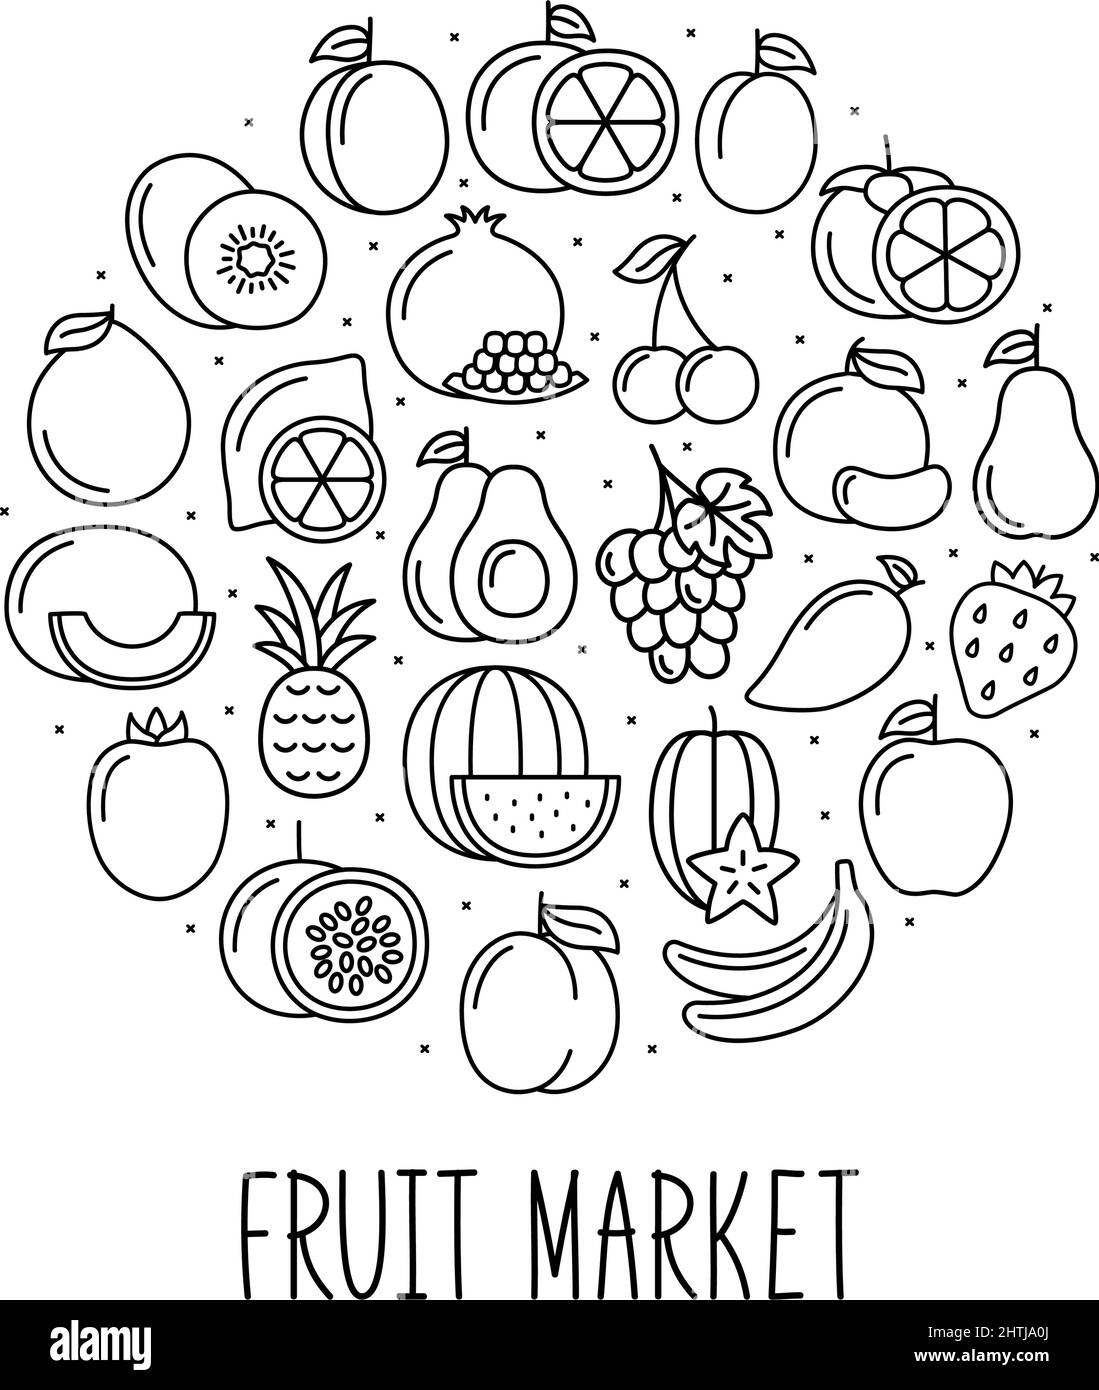 Round banner with fruits icons in linear style. Design for market and store, vector illustration Stock Vector